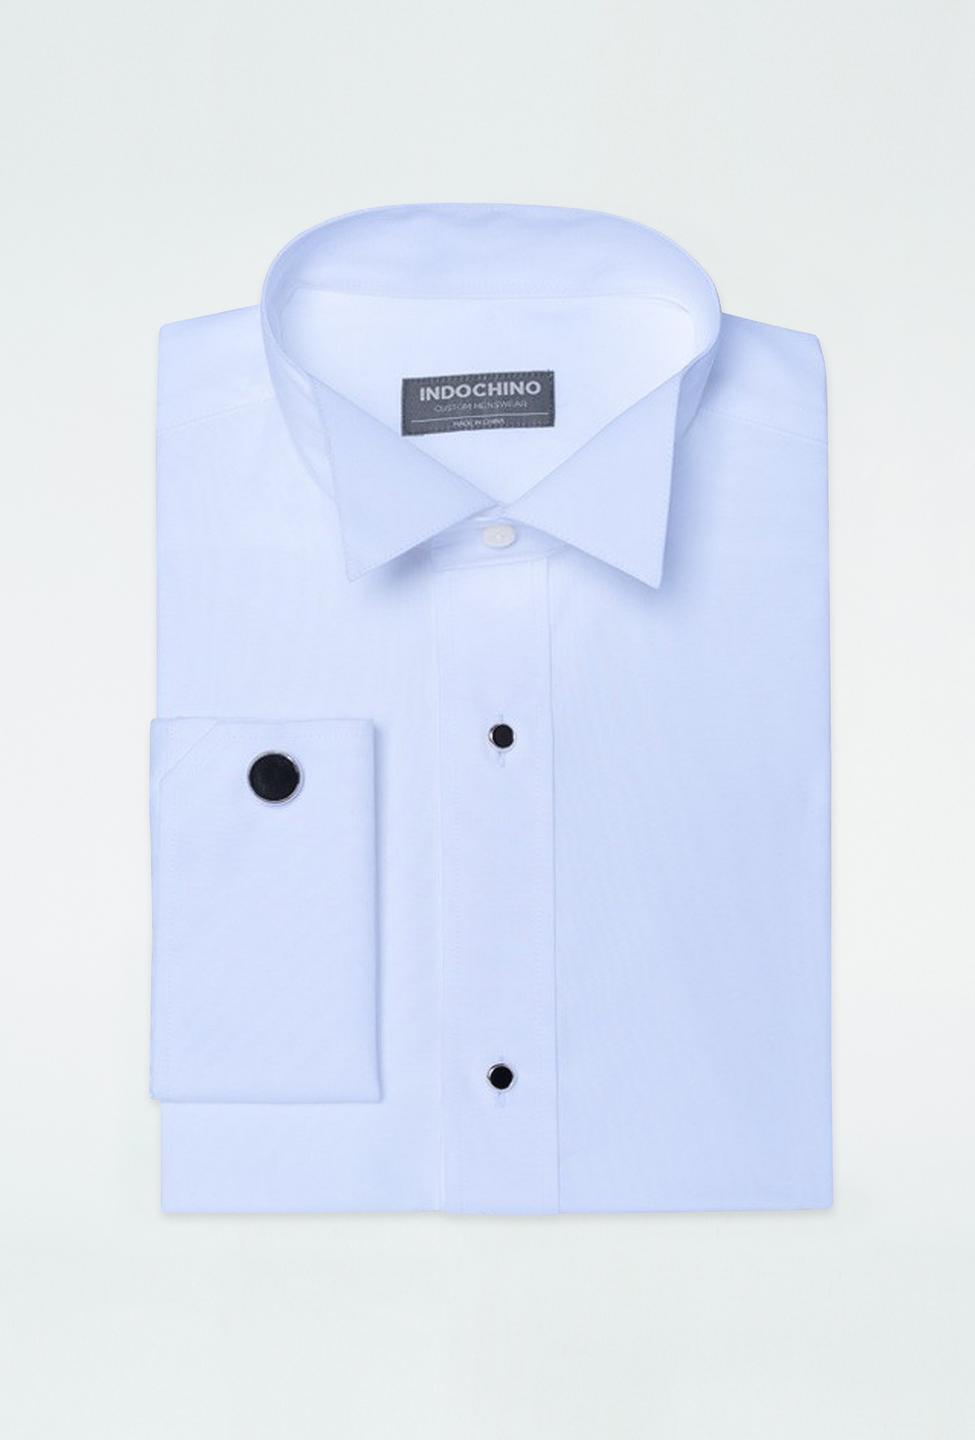 Blue shirt - Helston Solid Design from Tuxedo Indochino Collection